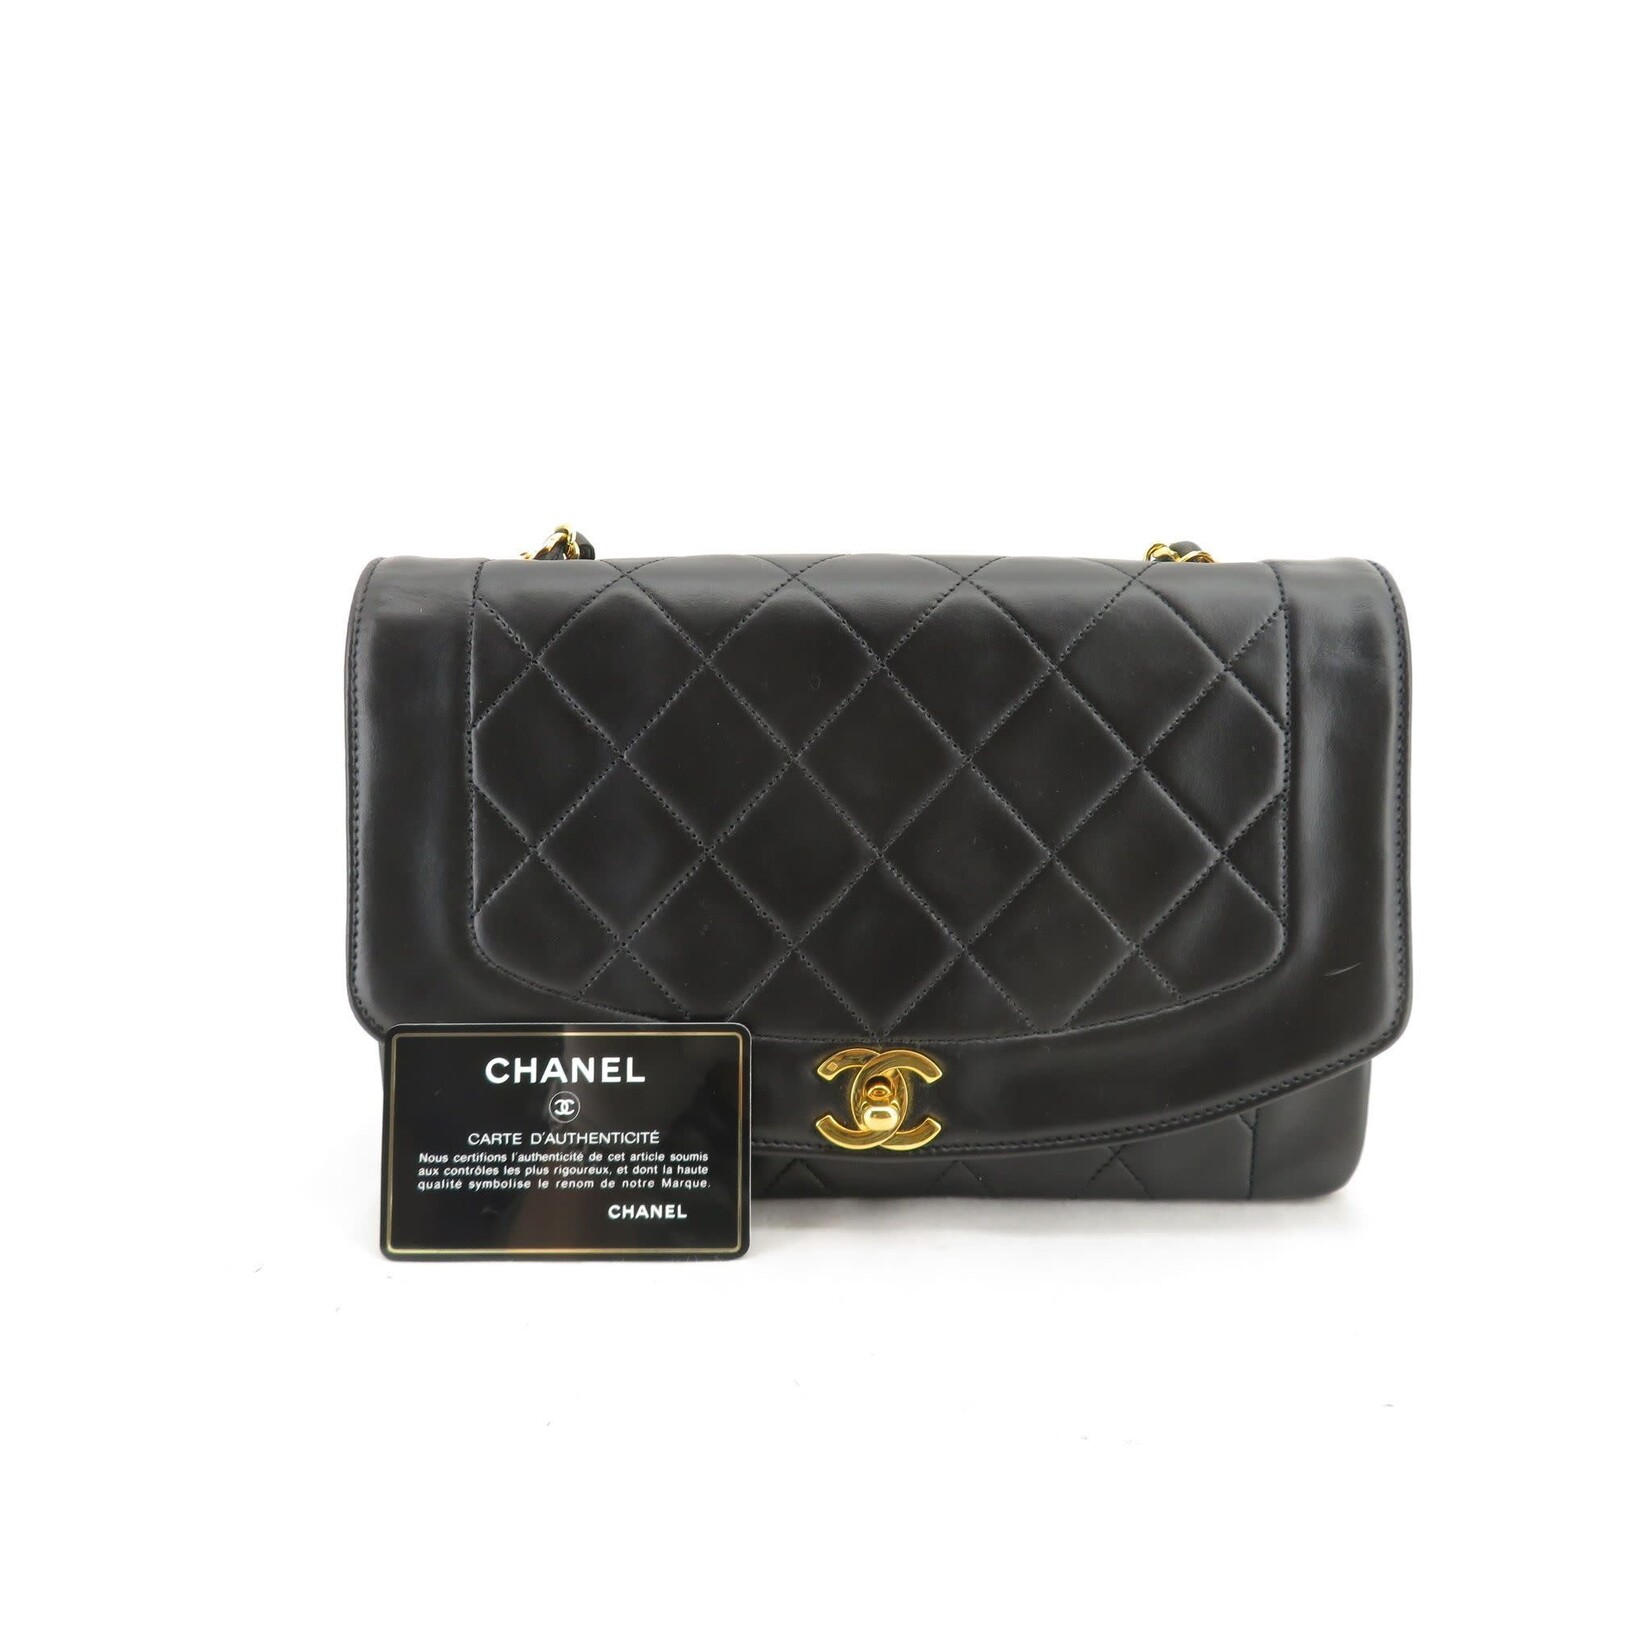 Chanel Chanel lamb skin quilted Diana flap bag